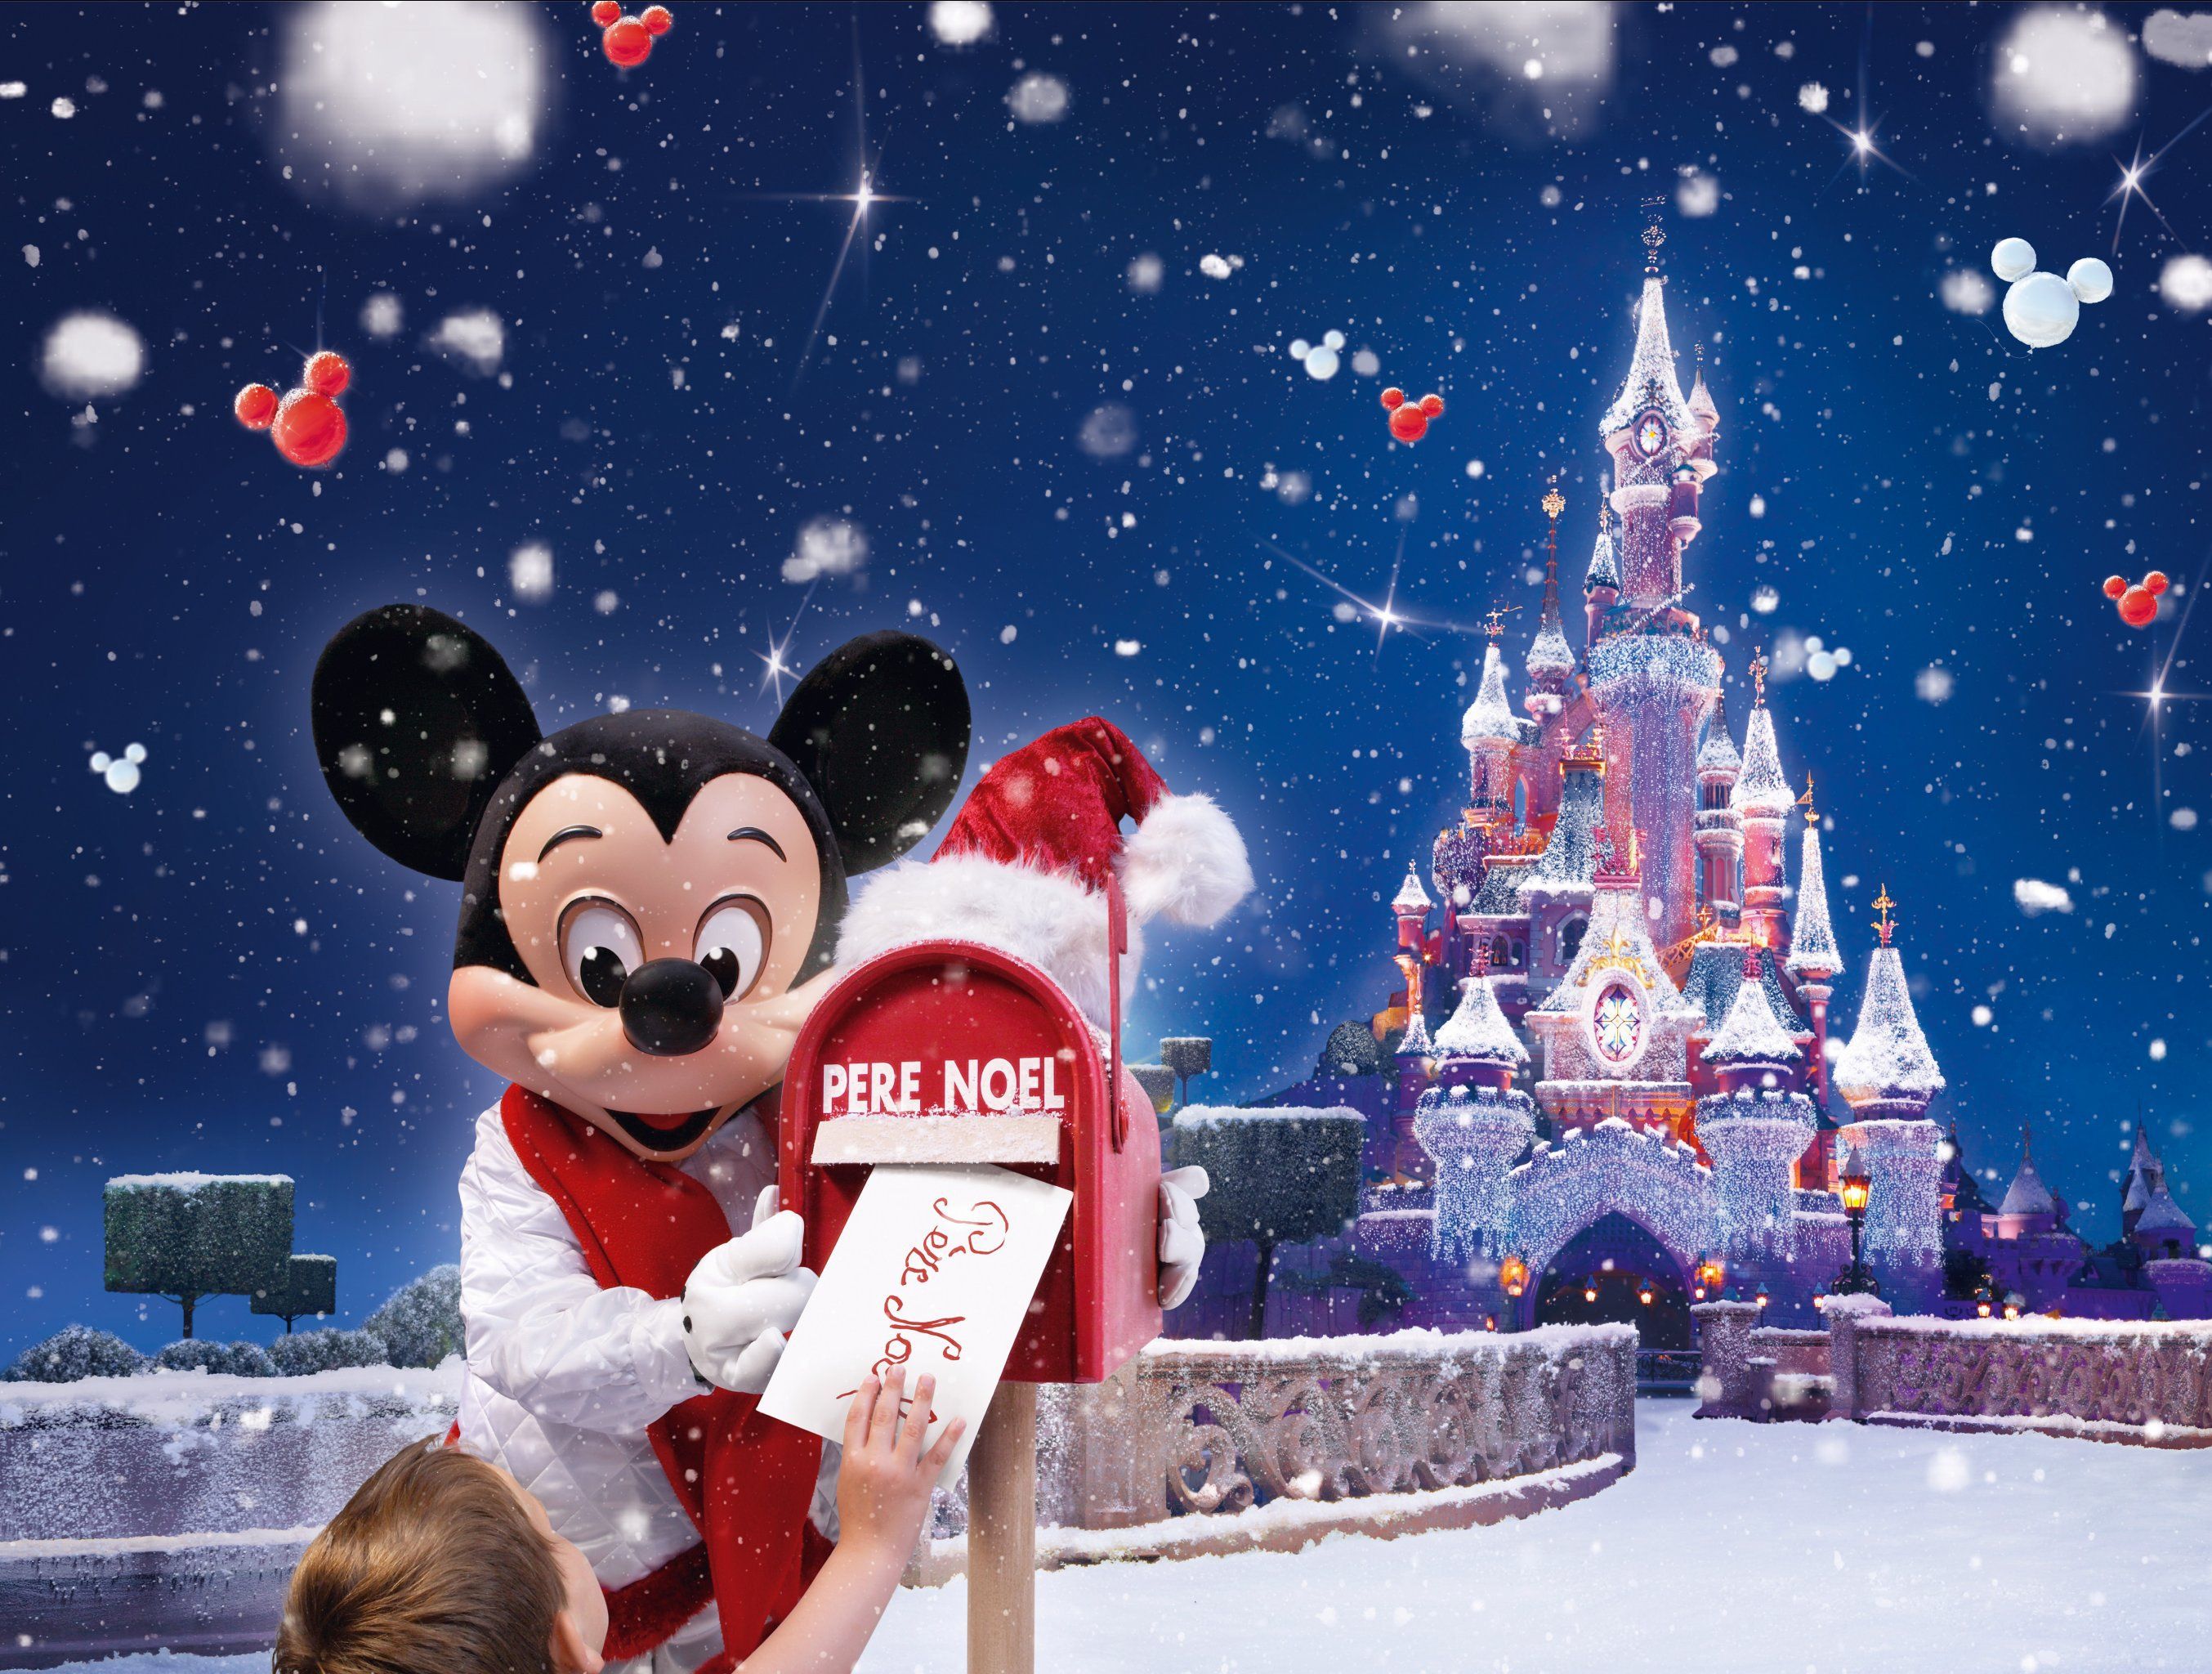 Mickey Mouse in Disneyland on Christmas wallpaper and image, picture, photo